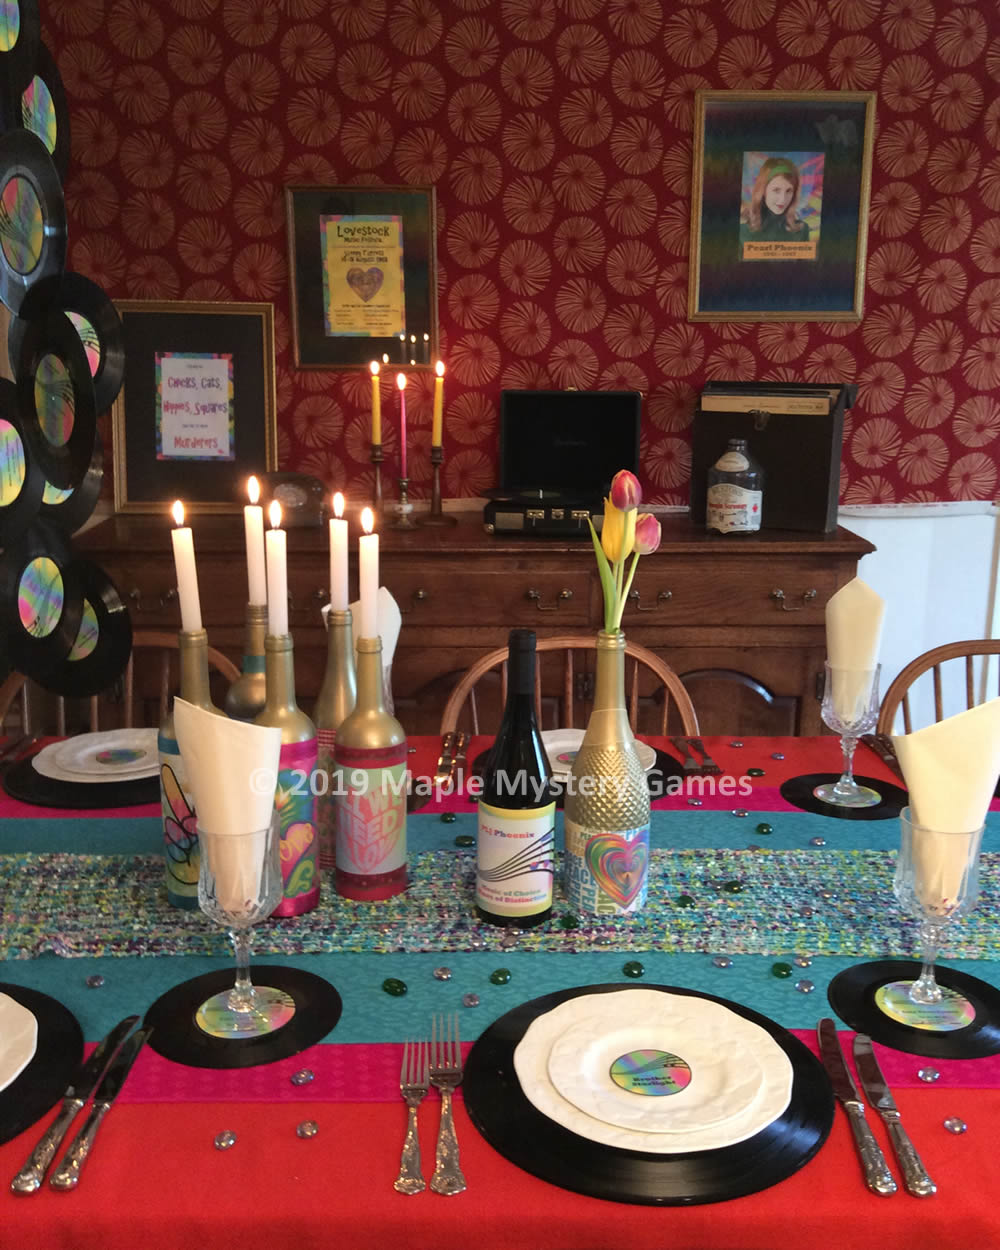 1960s party decorations with a hippie feel